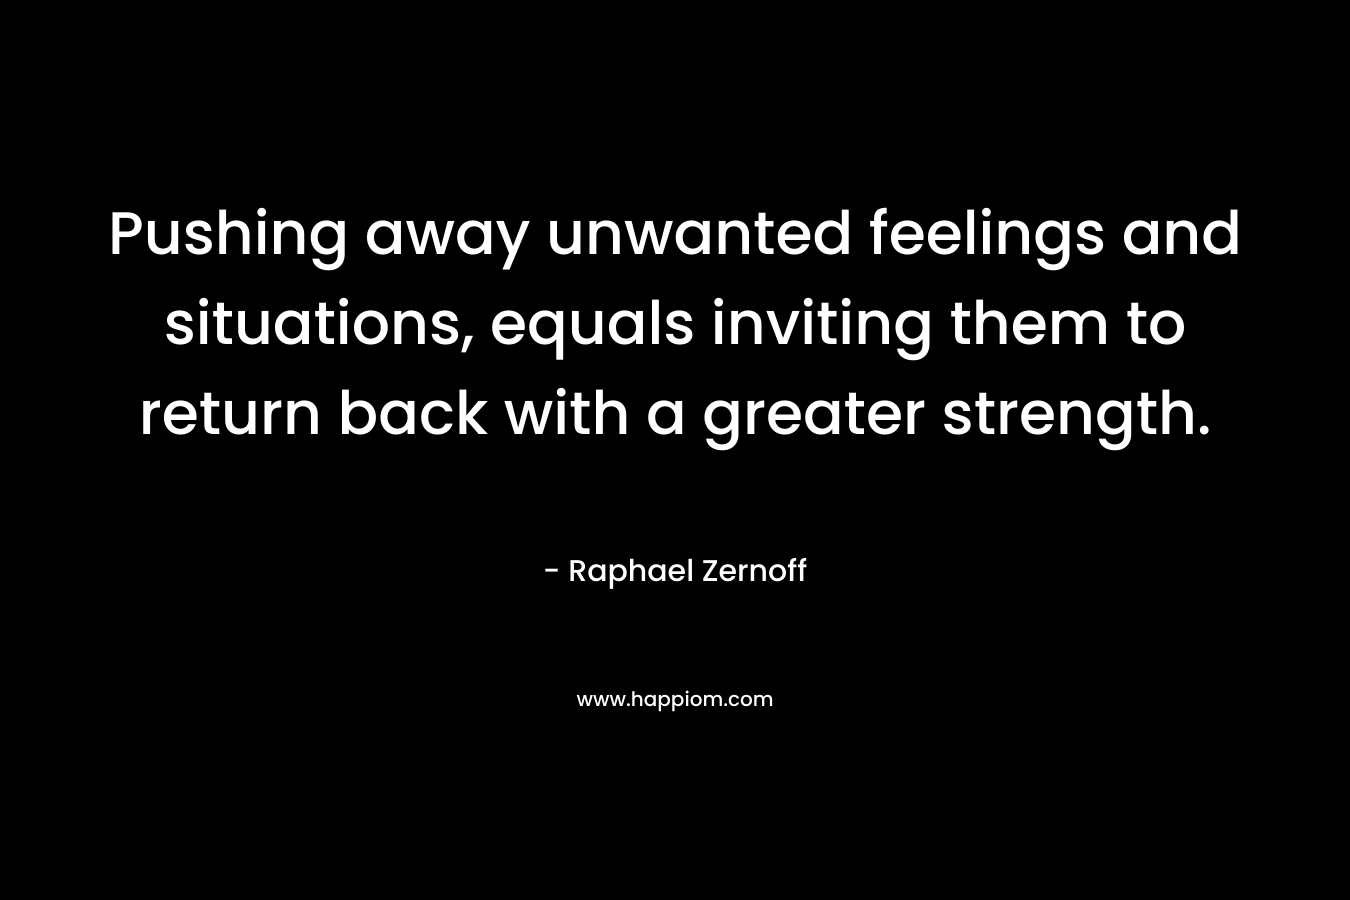 Pushing away unwanted feelings and situations, equals inviting them to return back with a greater strength.